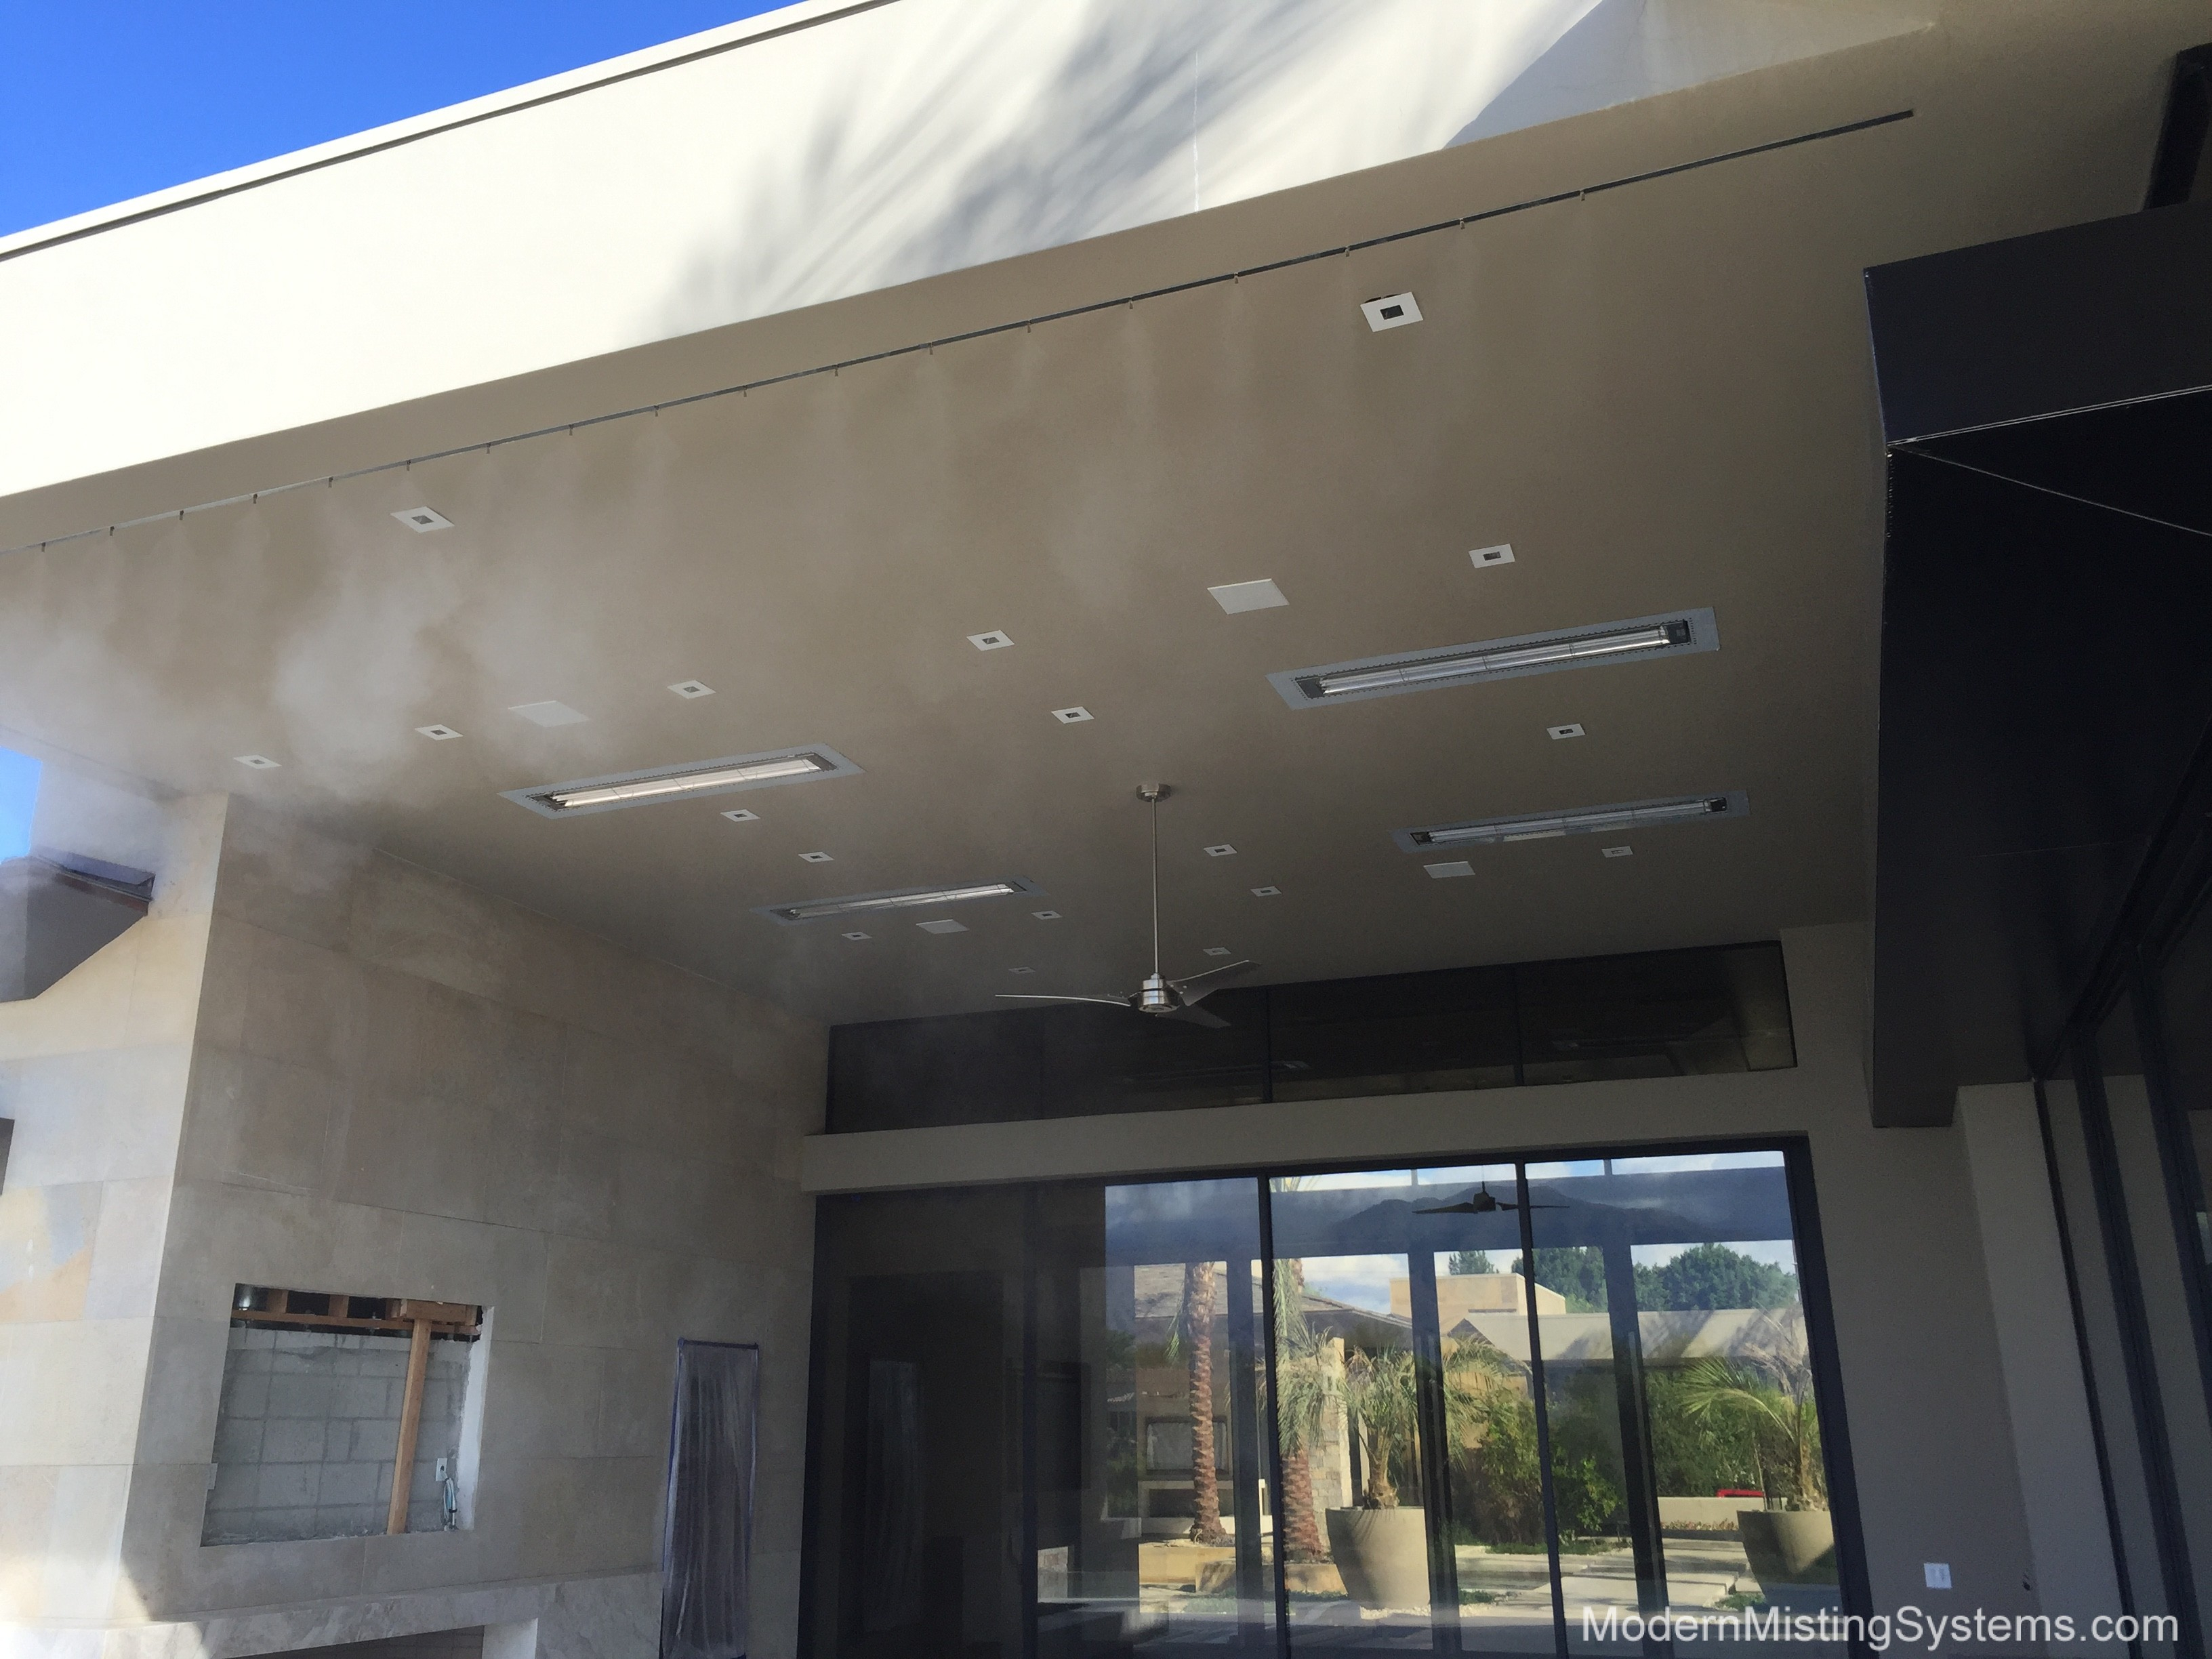 Patio Heaters Modern Misting Systems For Palm Springs And within dimensions 3264 X 2448